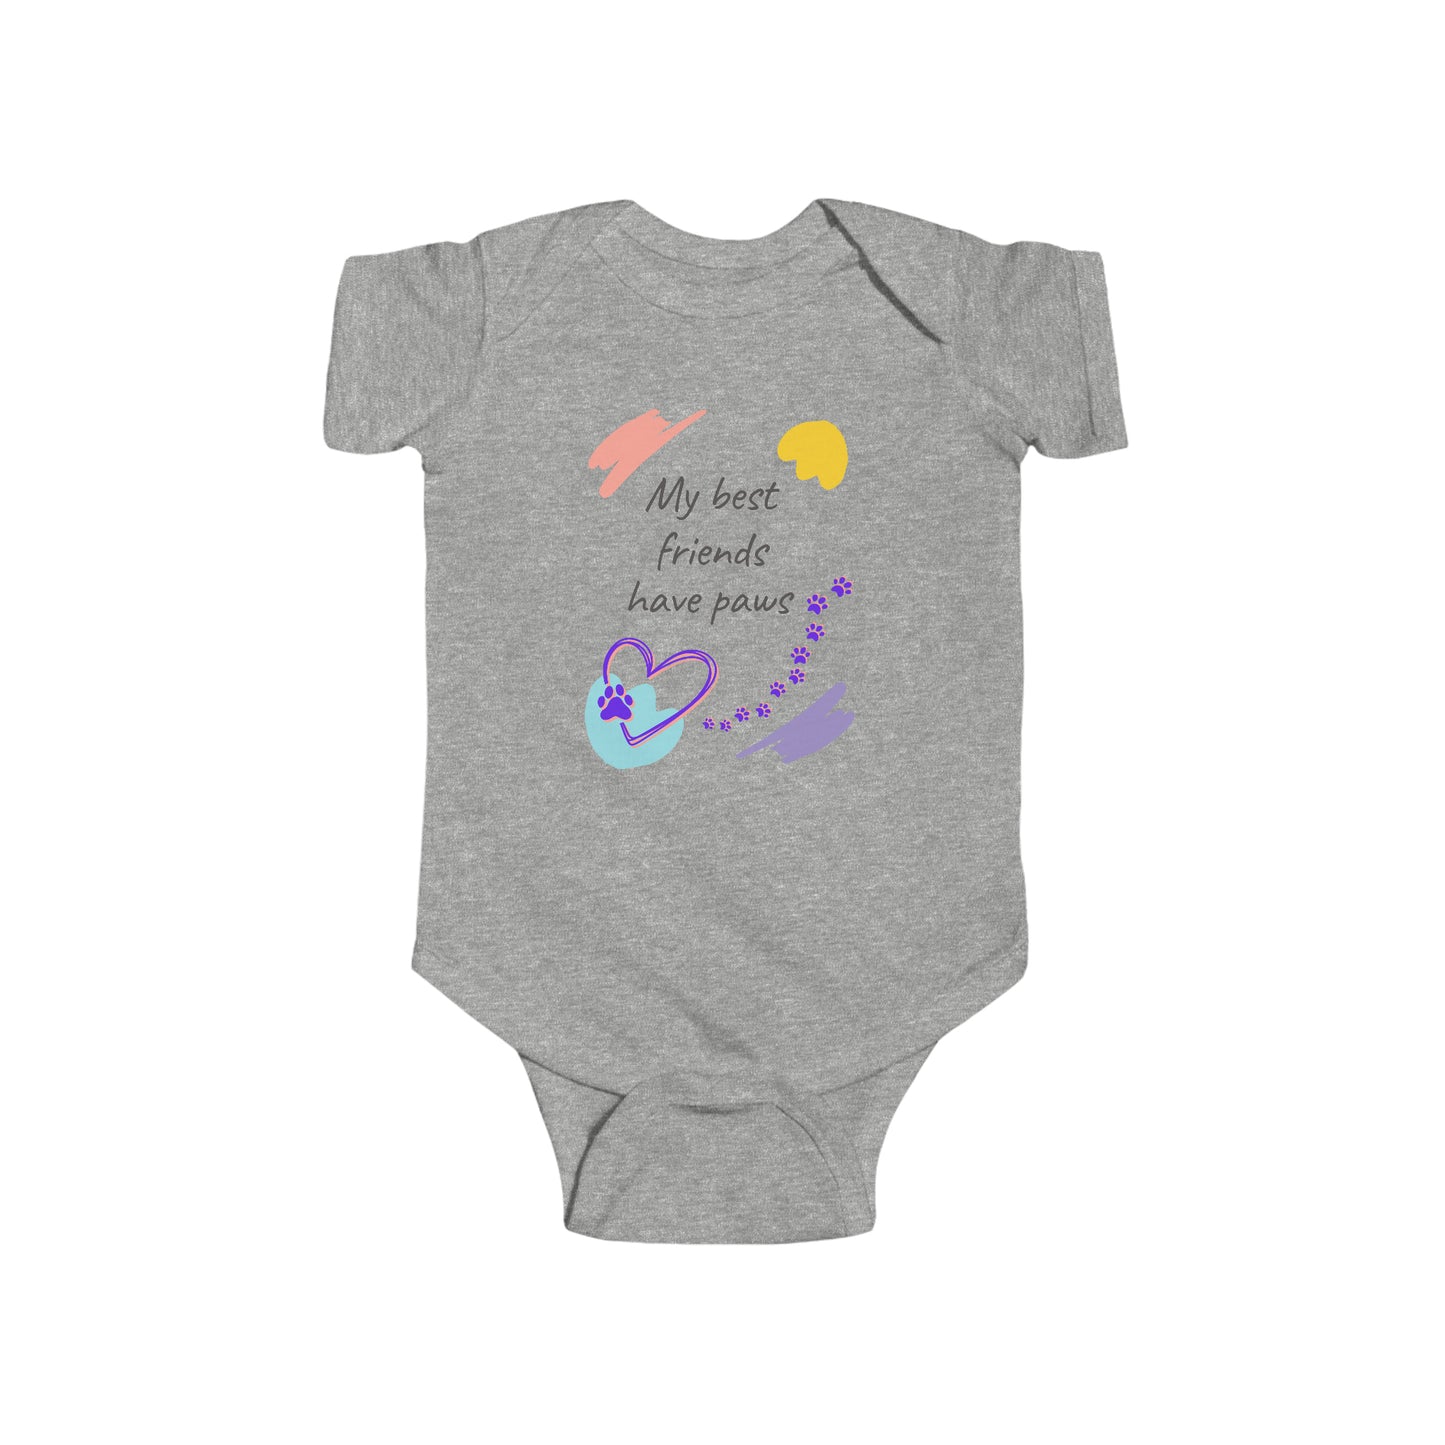 "Cat-Lady Grandma" Baby Bodysuit, "My Best Friends Have Paws" Design, Cat Lover Mom Gift, 4 Colors